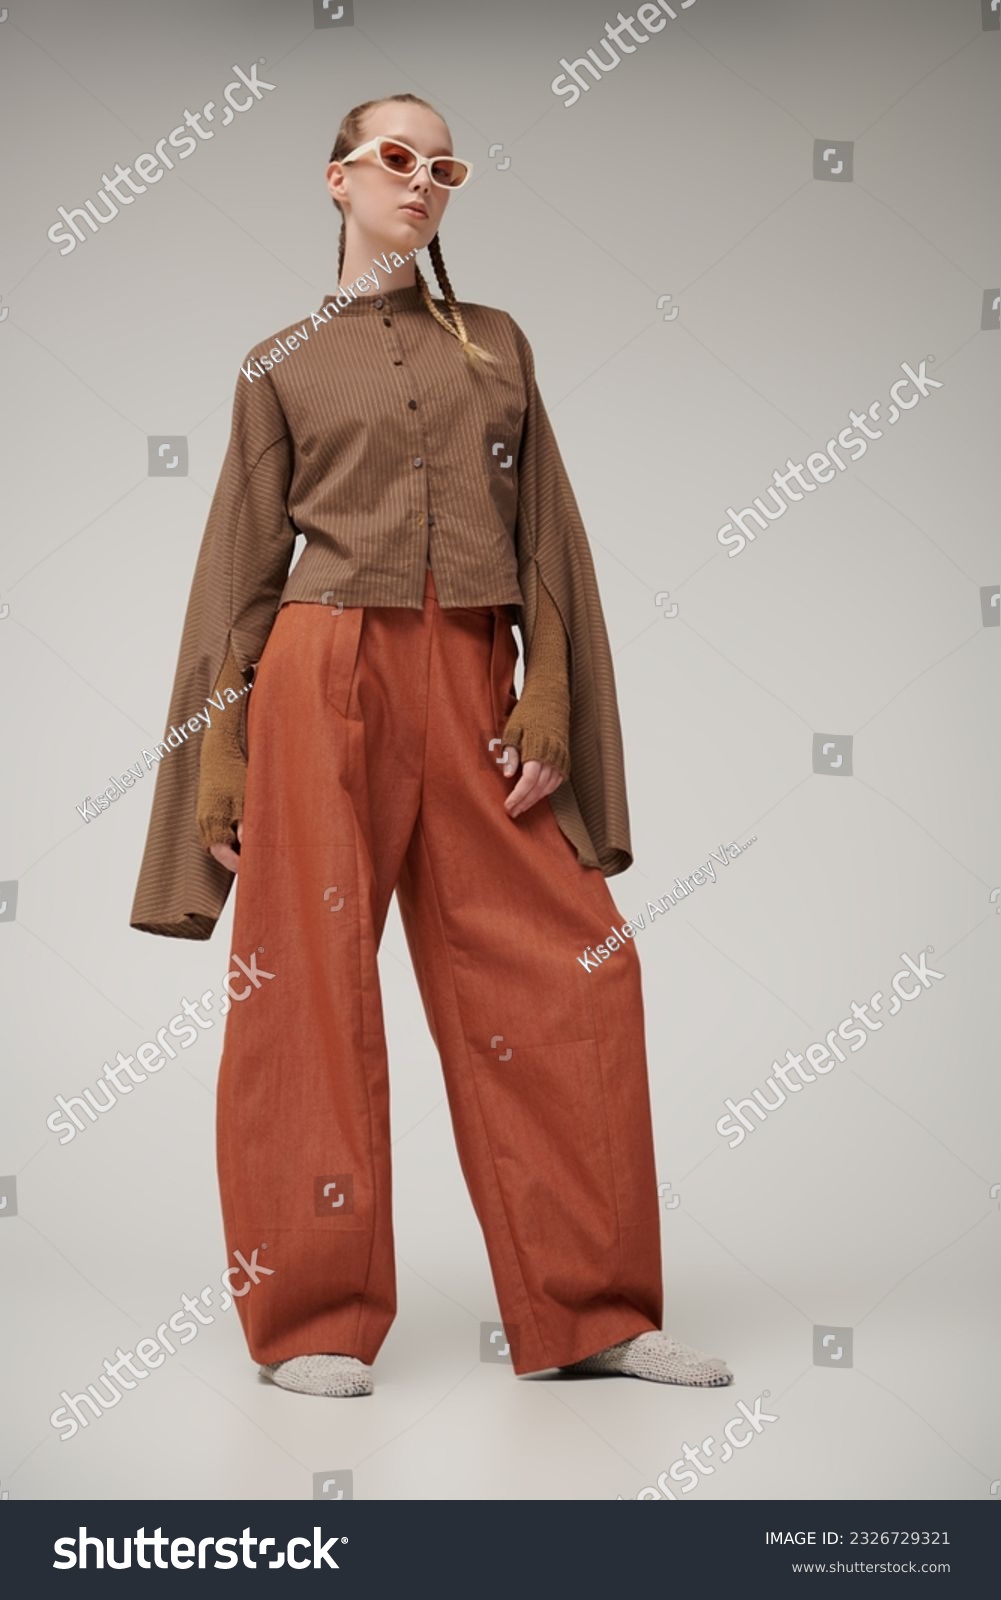 Trends. Haute couture collection. Beautiful fashion model girl posing in a designer brown shirt, knitted gloves and orange wide leg pants. Studio shot on a gray background. Stylish sunglasses. #2326729321